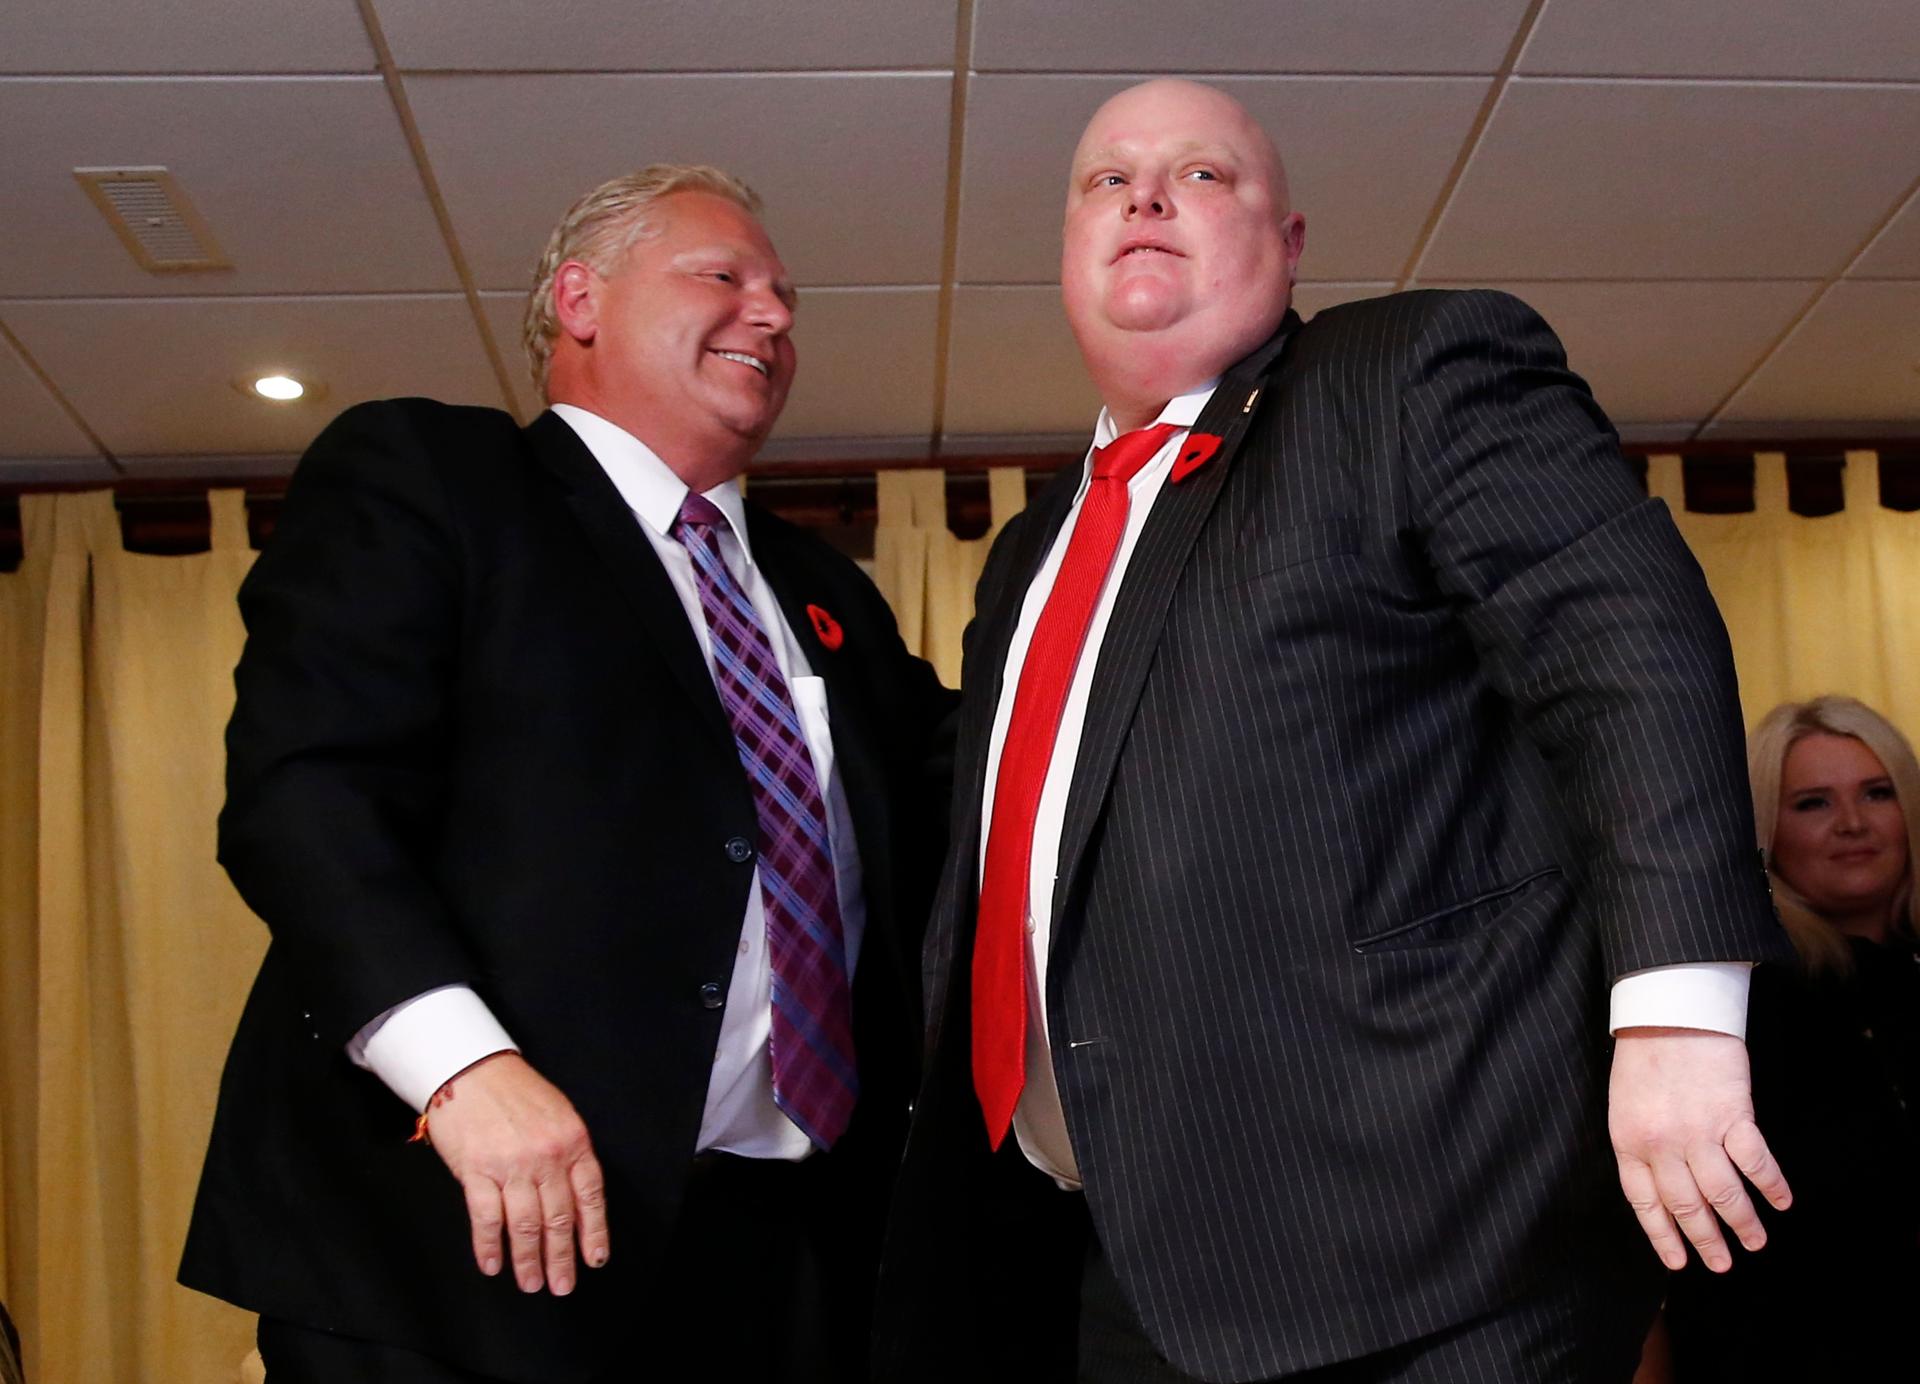 Mayor Rob Ford (R) is congratulated by his brother Doug after it was announced that Rob was elected as a city councillor and that Doug was stopped in his bid to become mayor in the municipal election in Toronto, October 27, 2014. 